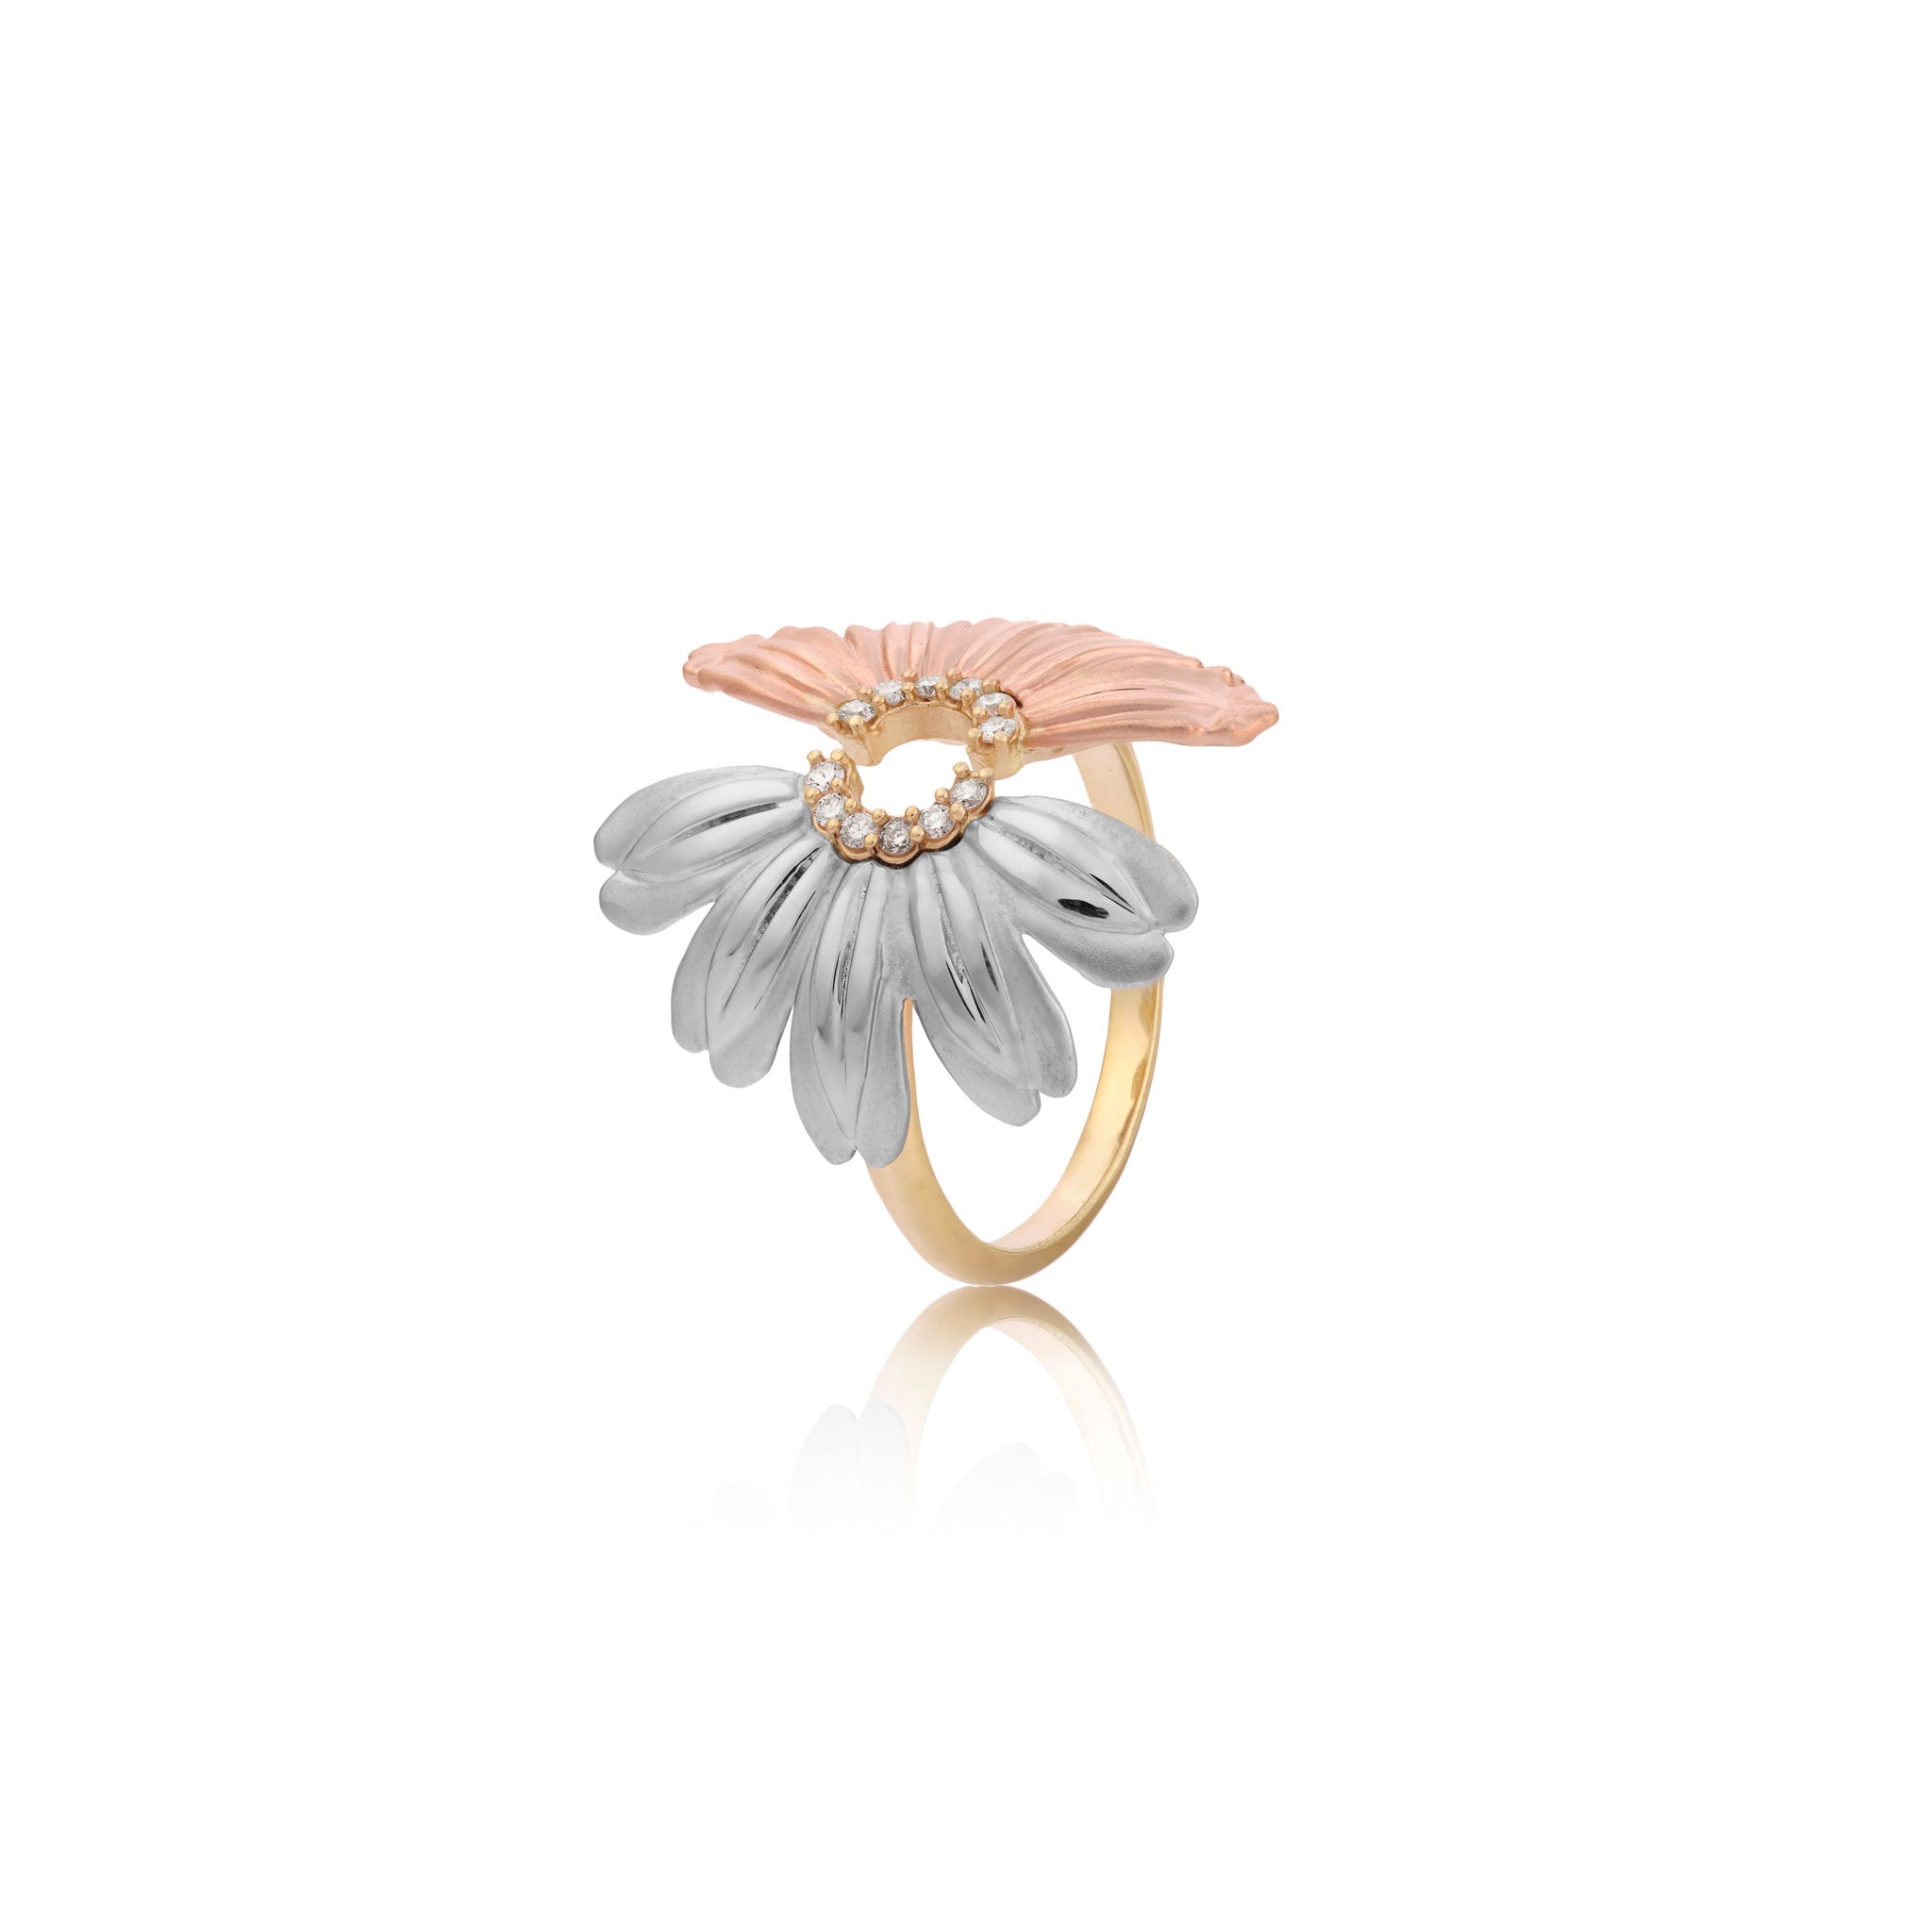 Beach & Mountain Naupaka Ring in Tri Color Gold with Diamonds